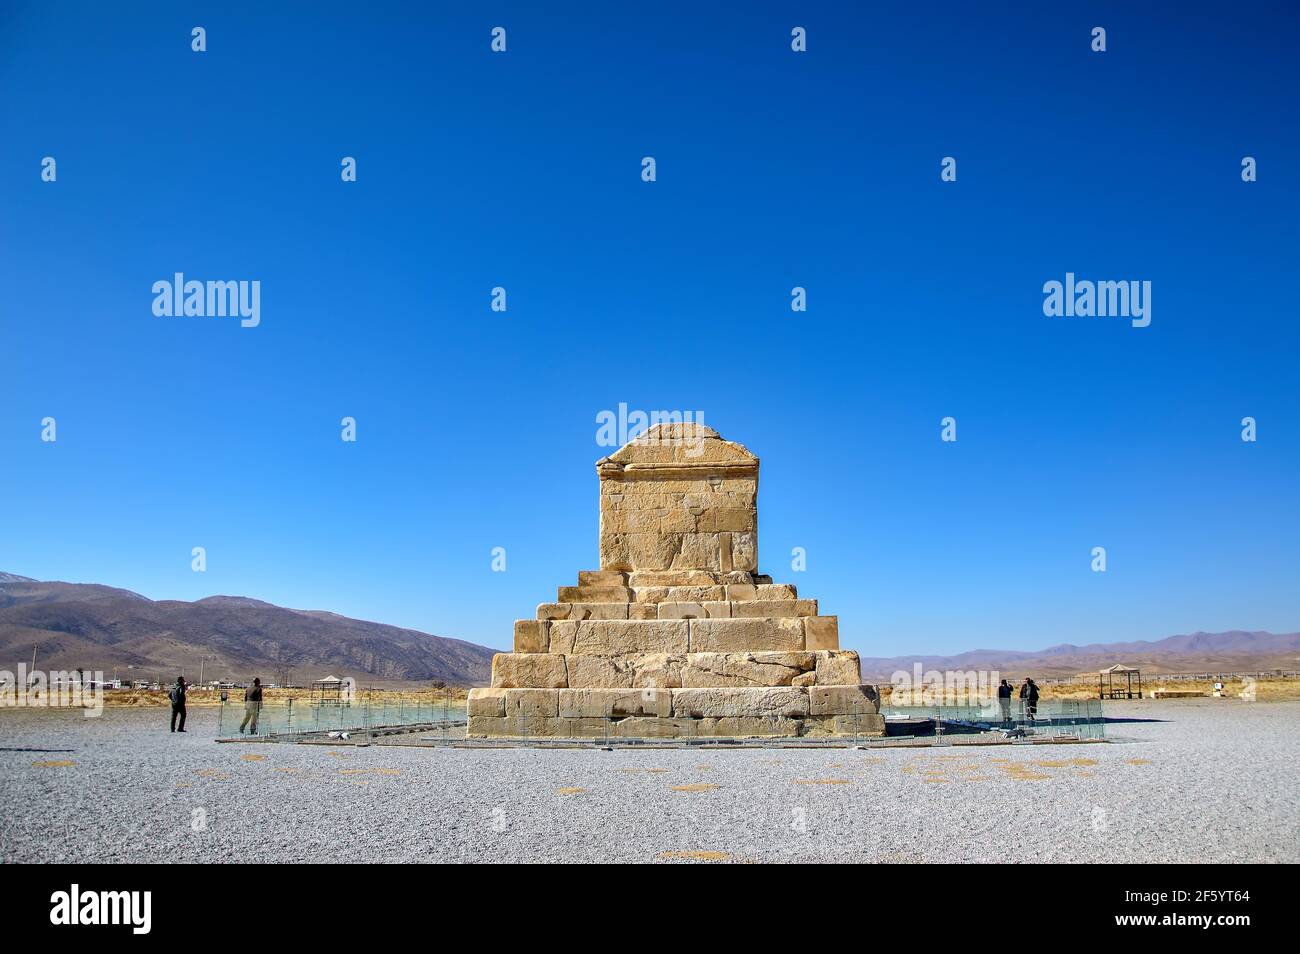 Pasargadae, Iran - December 16, 2015: The tomb of Cyrus the Great, founder of the Achaemenid empire, in Pasargadae, Iran Stock Photo